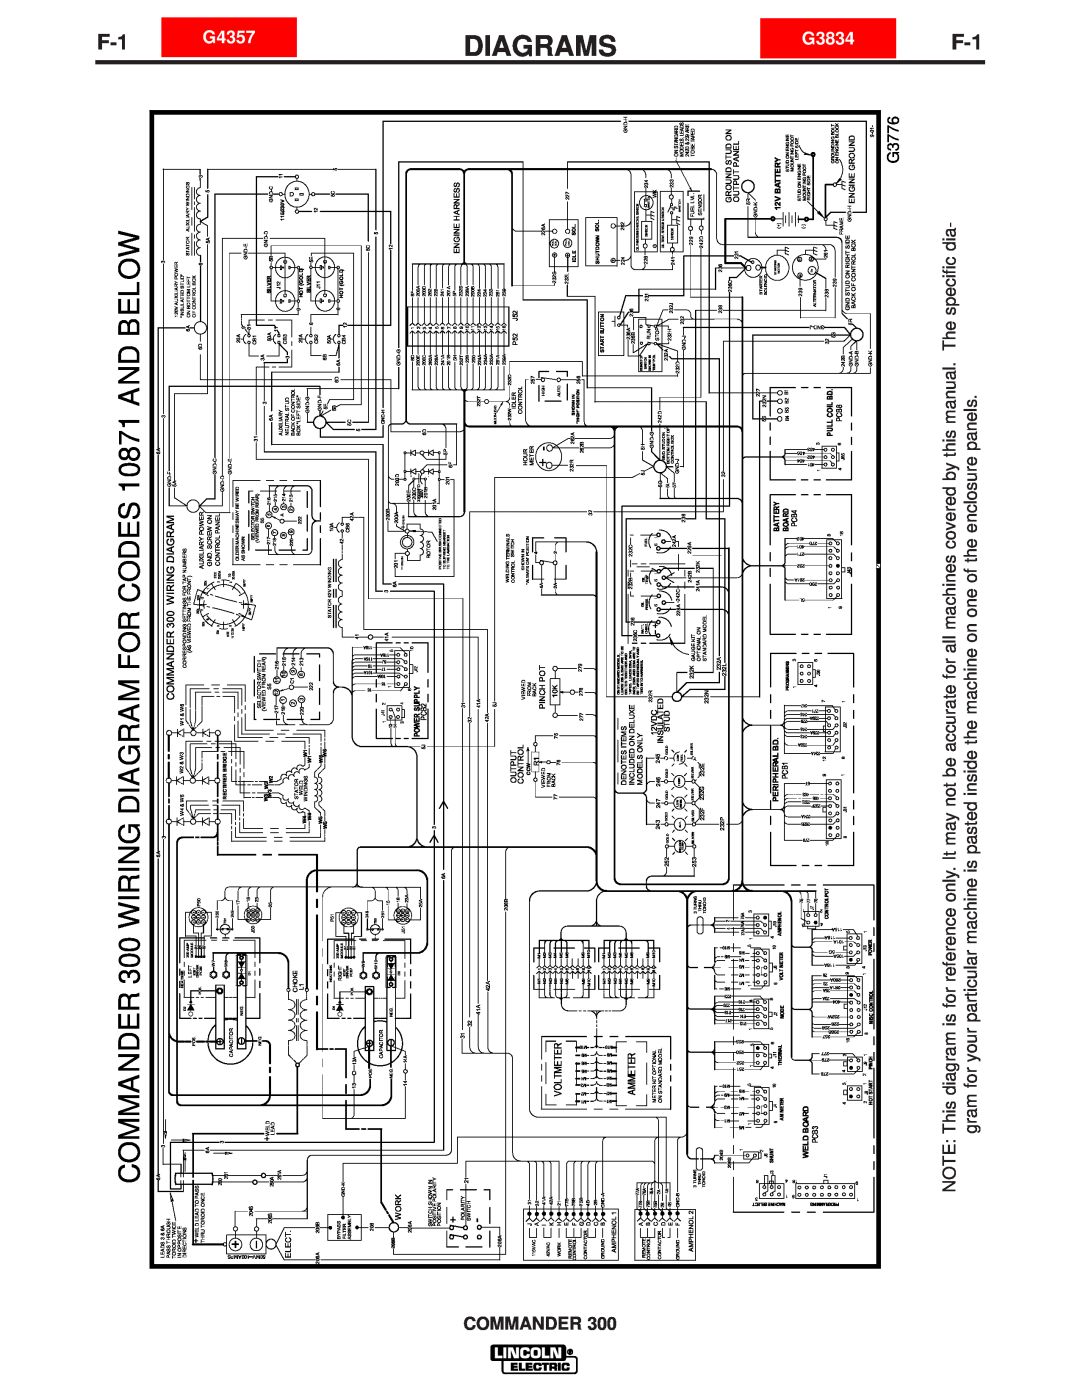 Lincoln Electric IM700-D Diagrams, COMMANDER 300 WIRING DIAGRAM FOR CODES 10871 AND BELOW, G4357, Commander, G3834, Board 